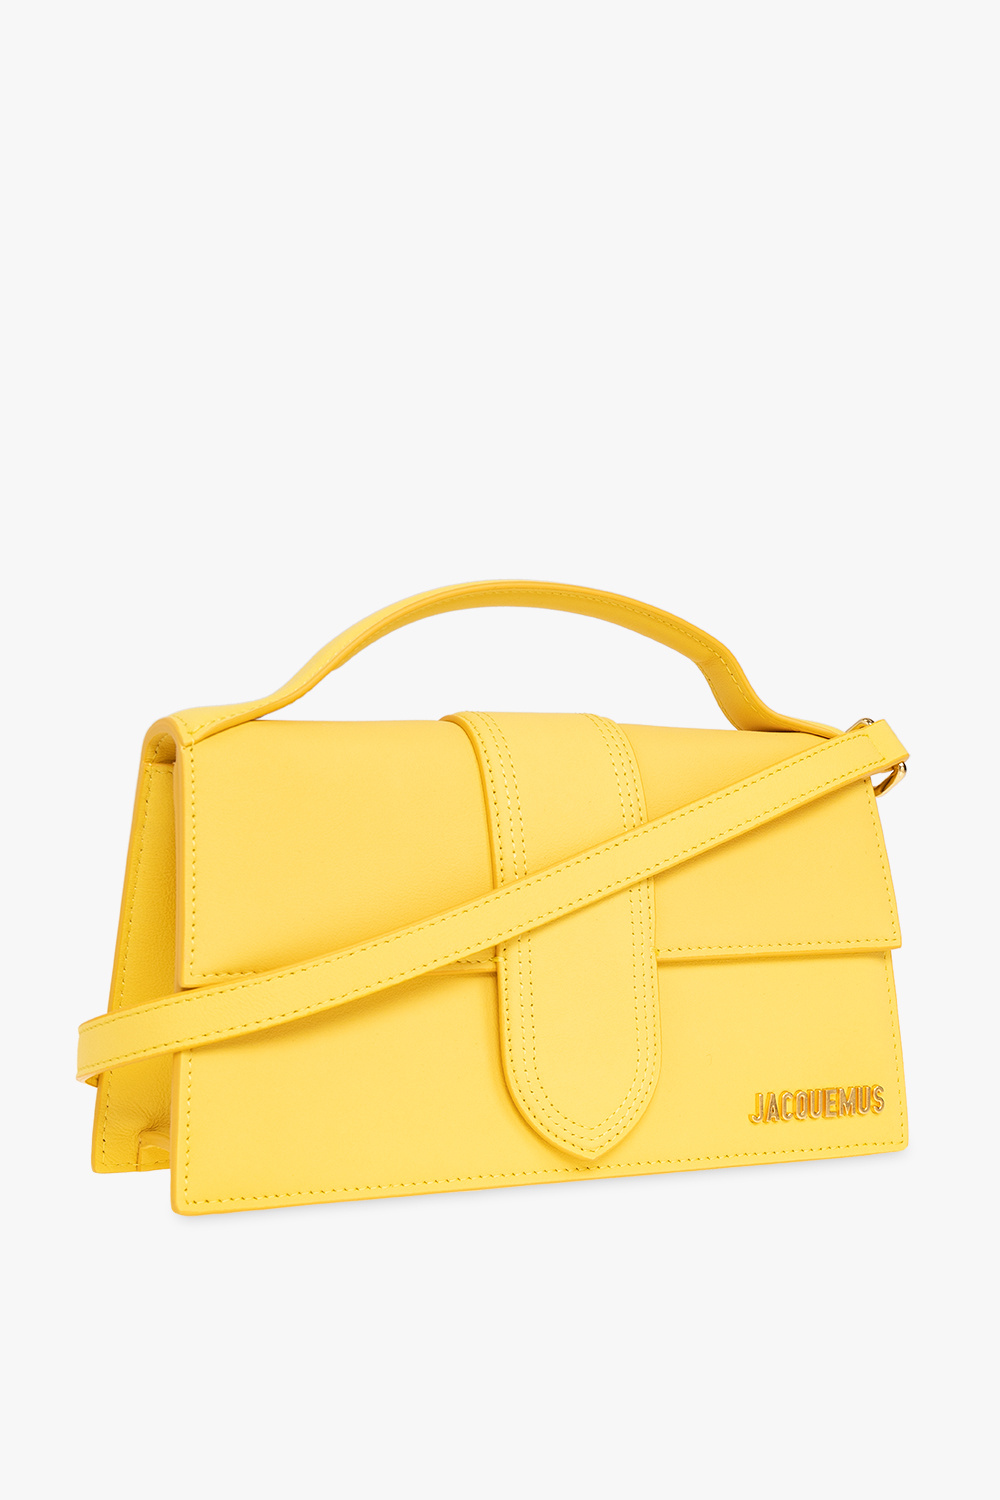 Jacquemus Le Grand Bambino Bag Yellow 100% Authentic Brand New w